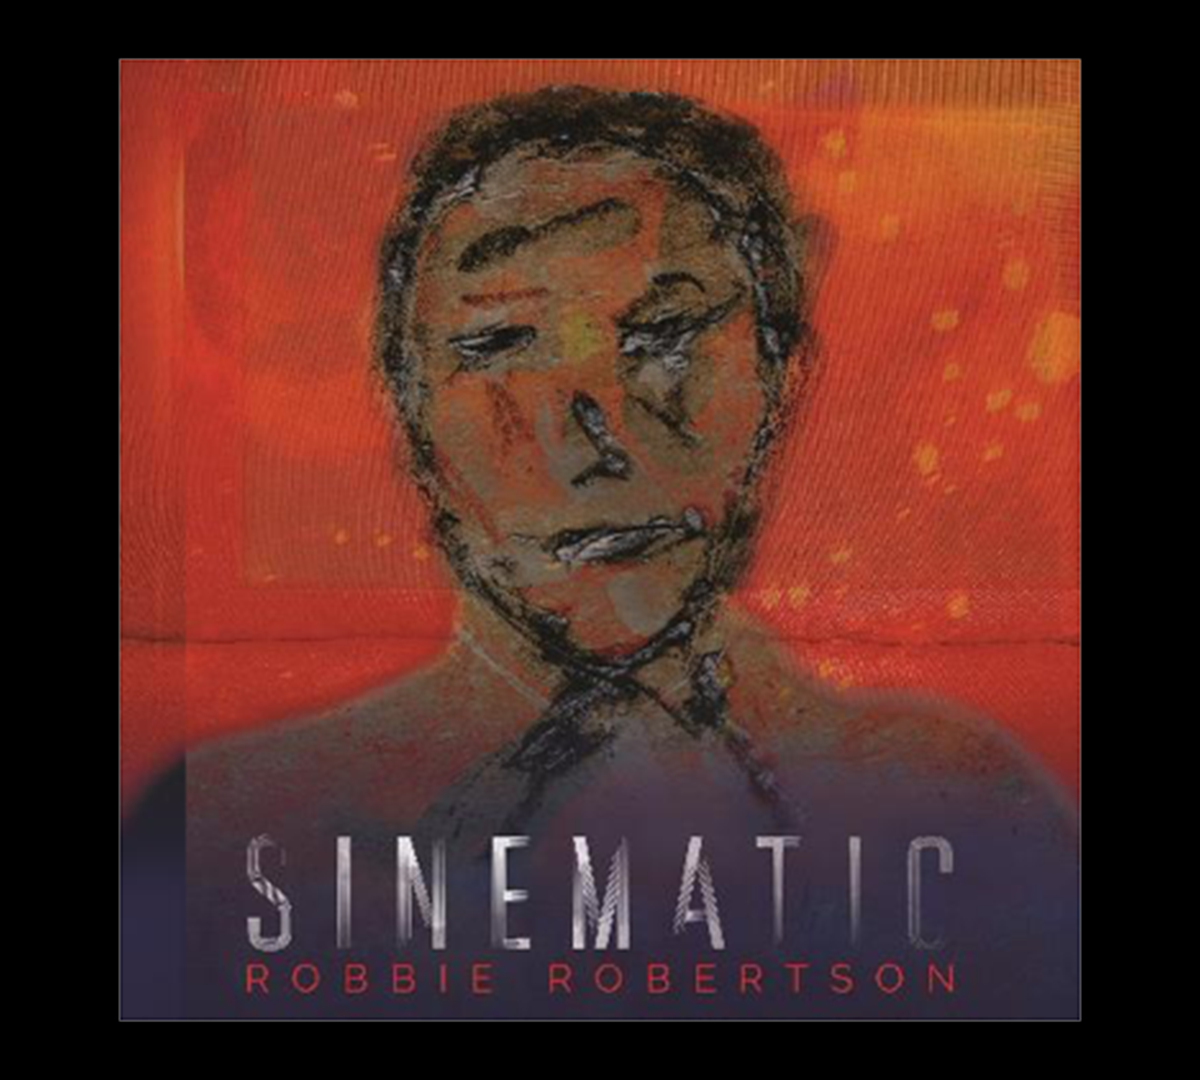 Robbie Robertson Taps Into Decades Of Film Work And A Fascination With Human Nature’s Darker Corridors For Evocative New Solo Album, Sinematic, Coming September 20